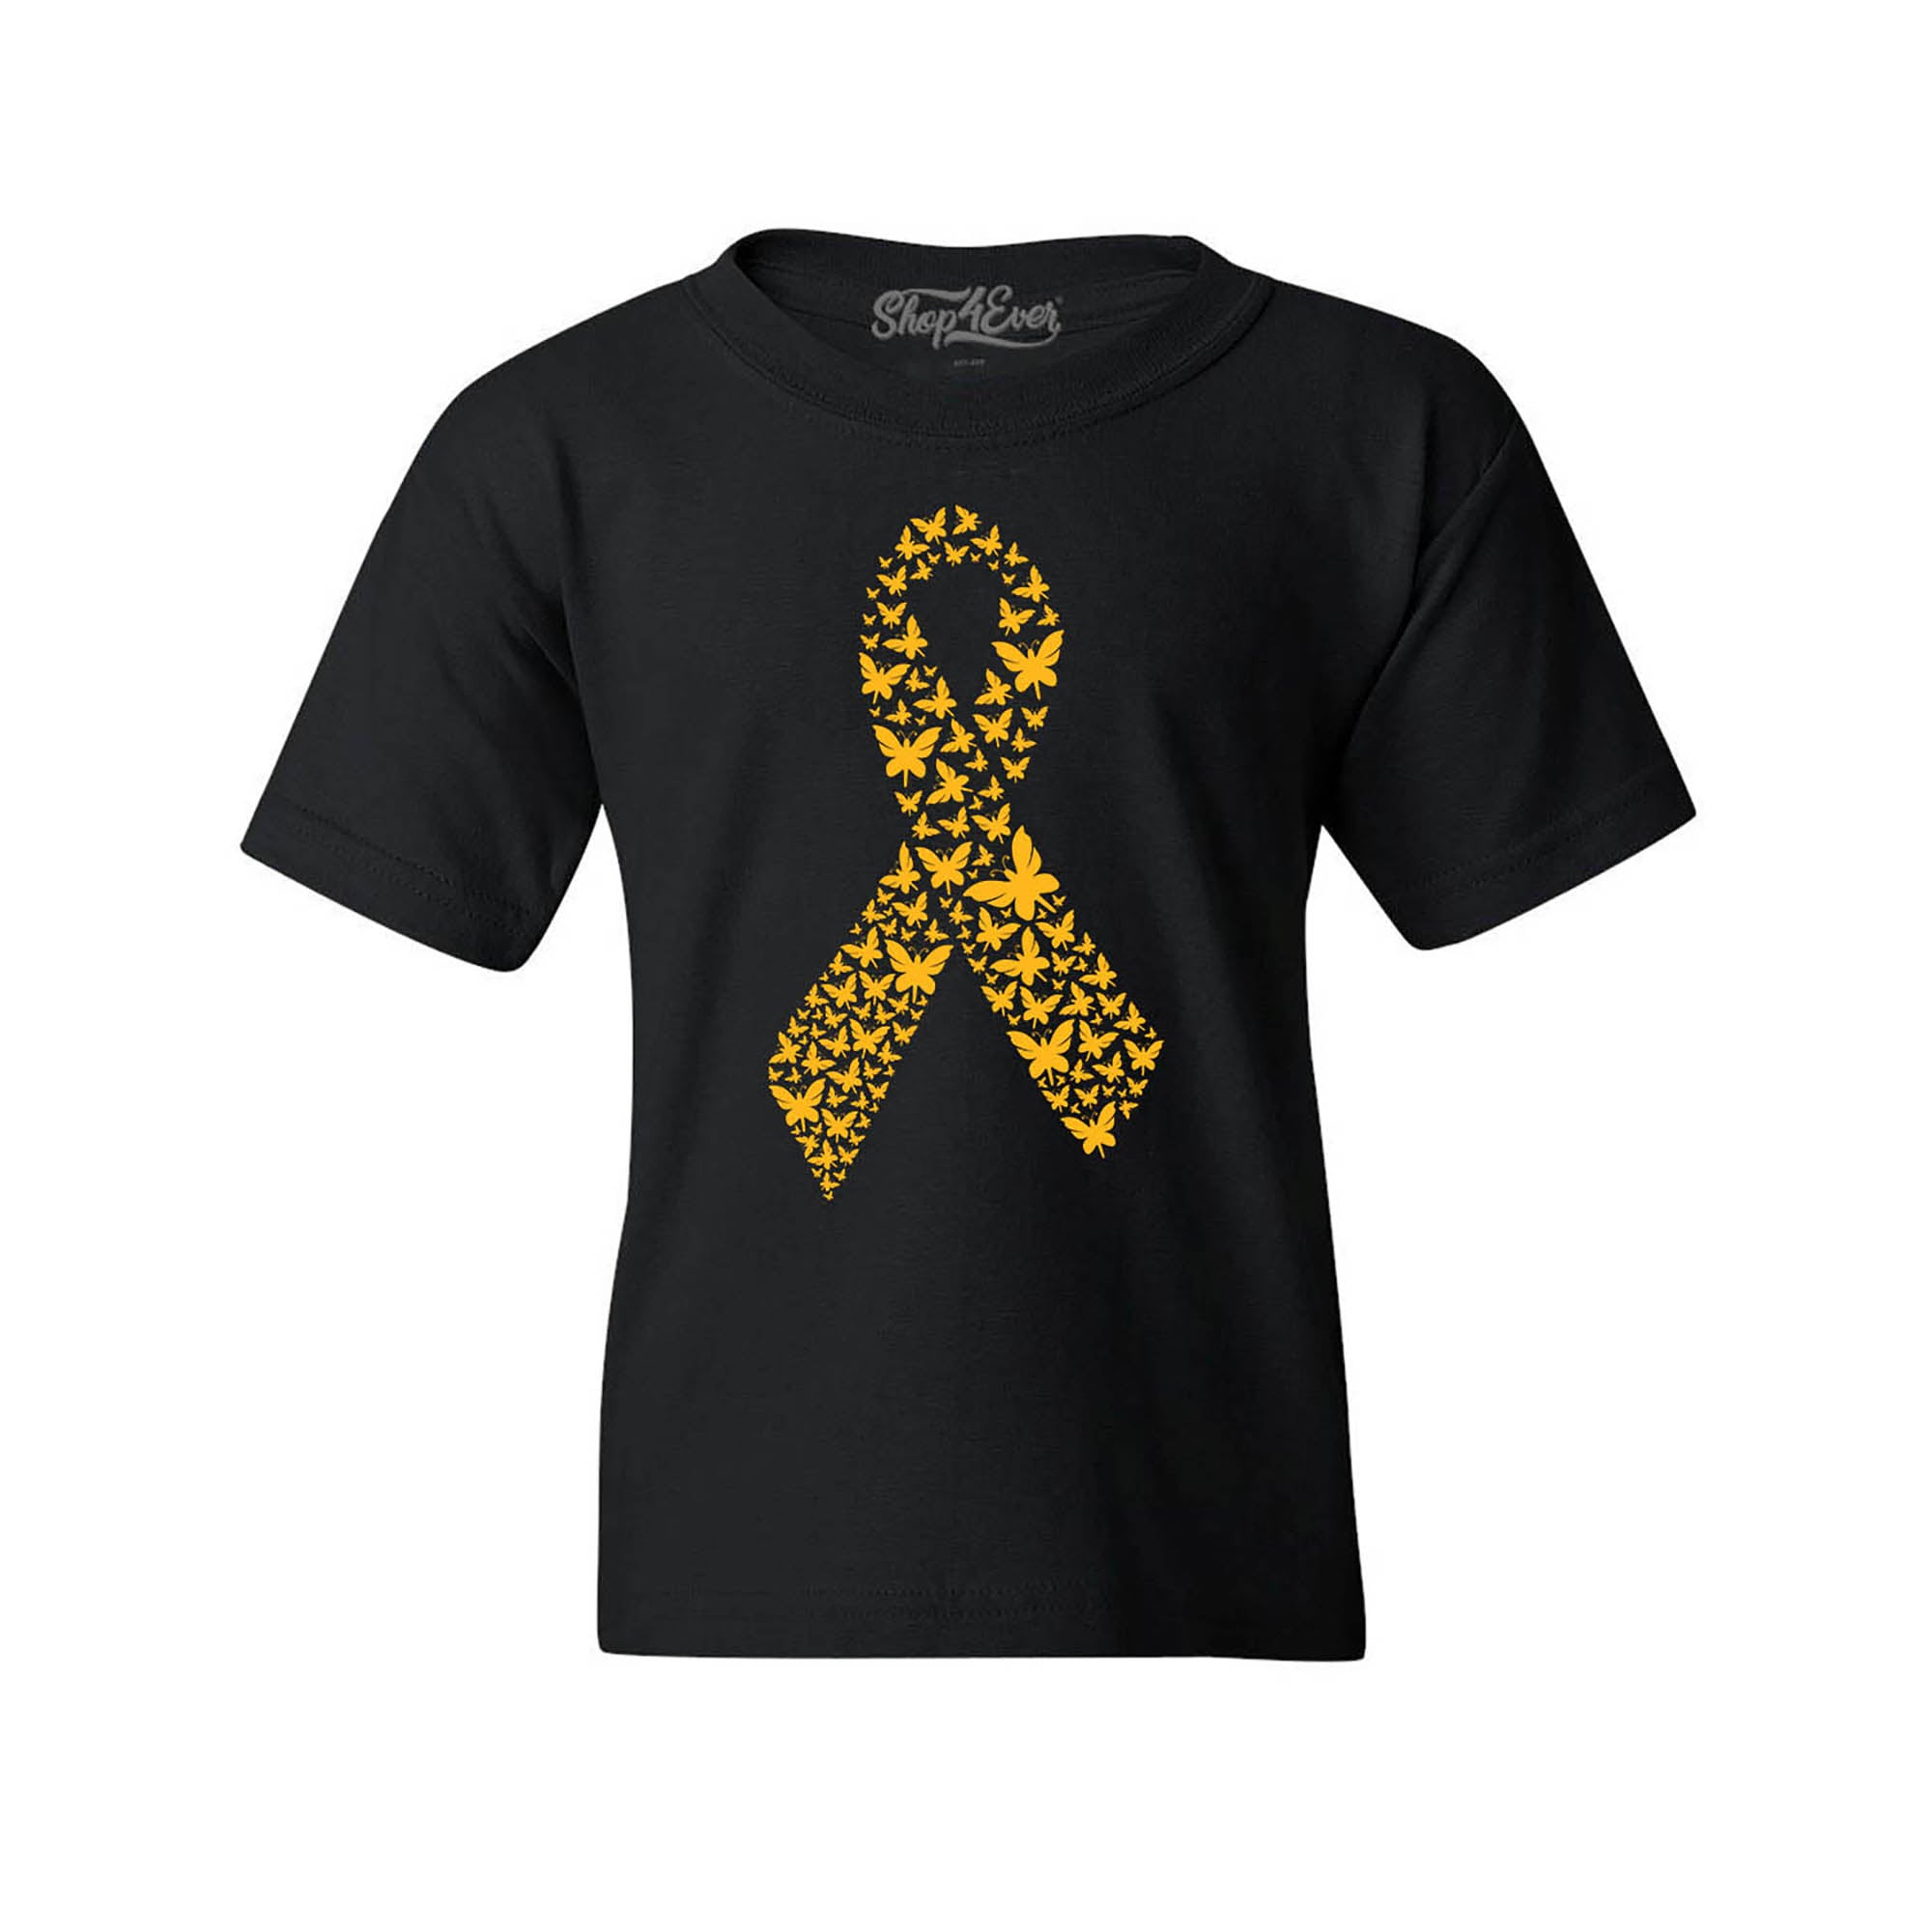 Gold Butterfly Ribbon Childhood Cancer Awareness Kids Child Youth's T-Shirt